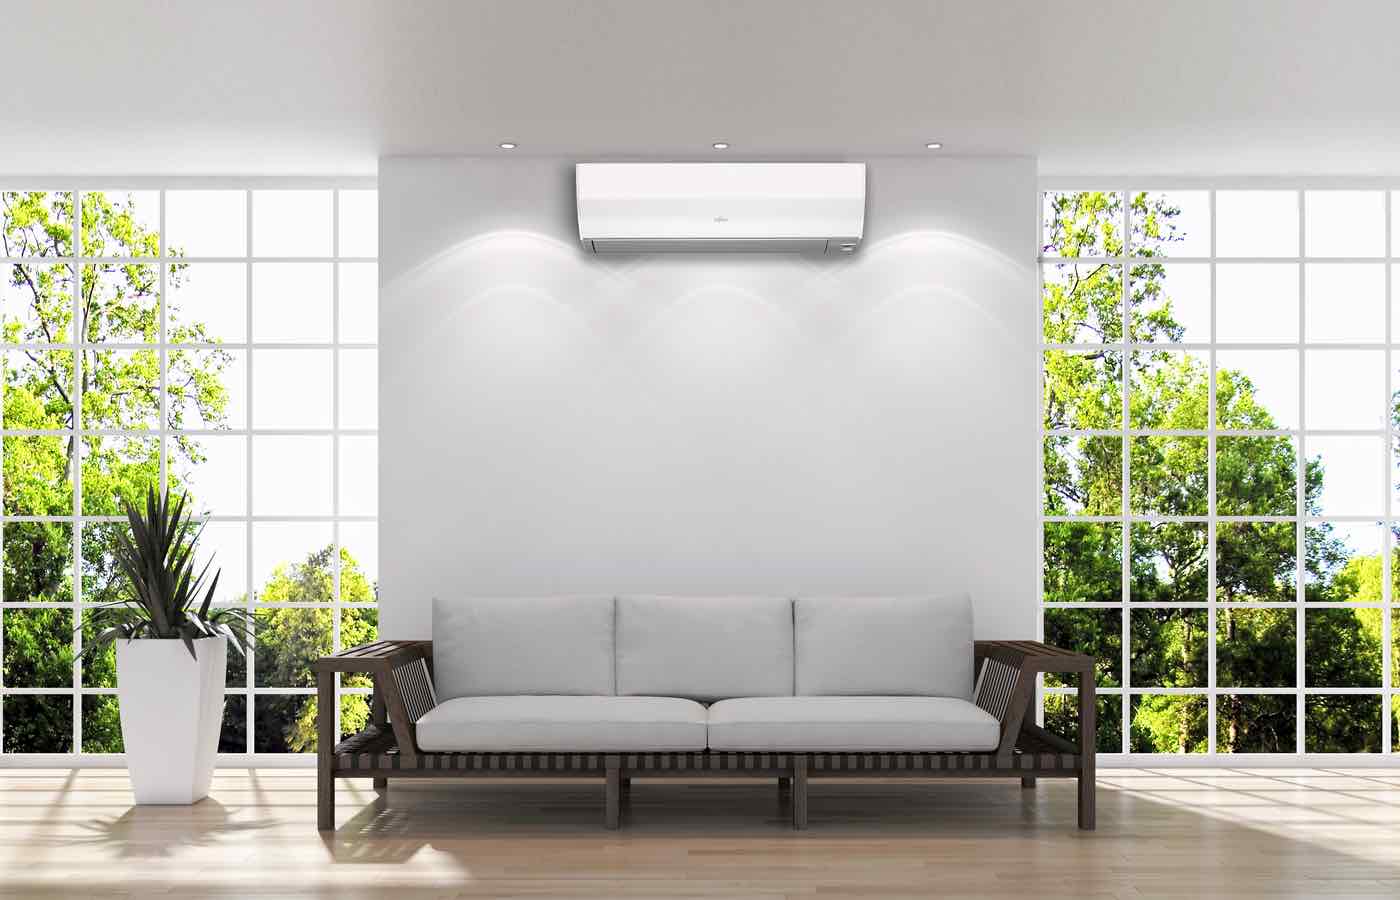 Wall Mounted Ductless Heat Pump